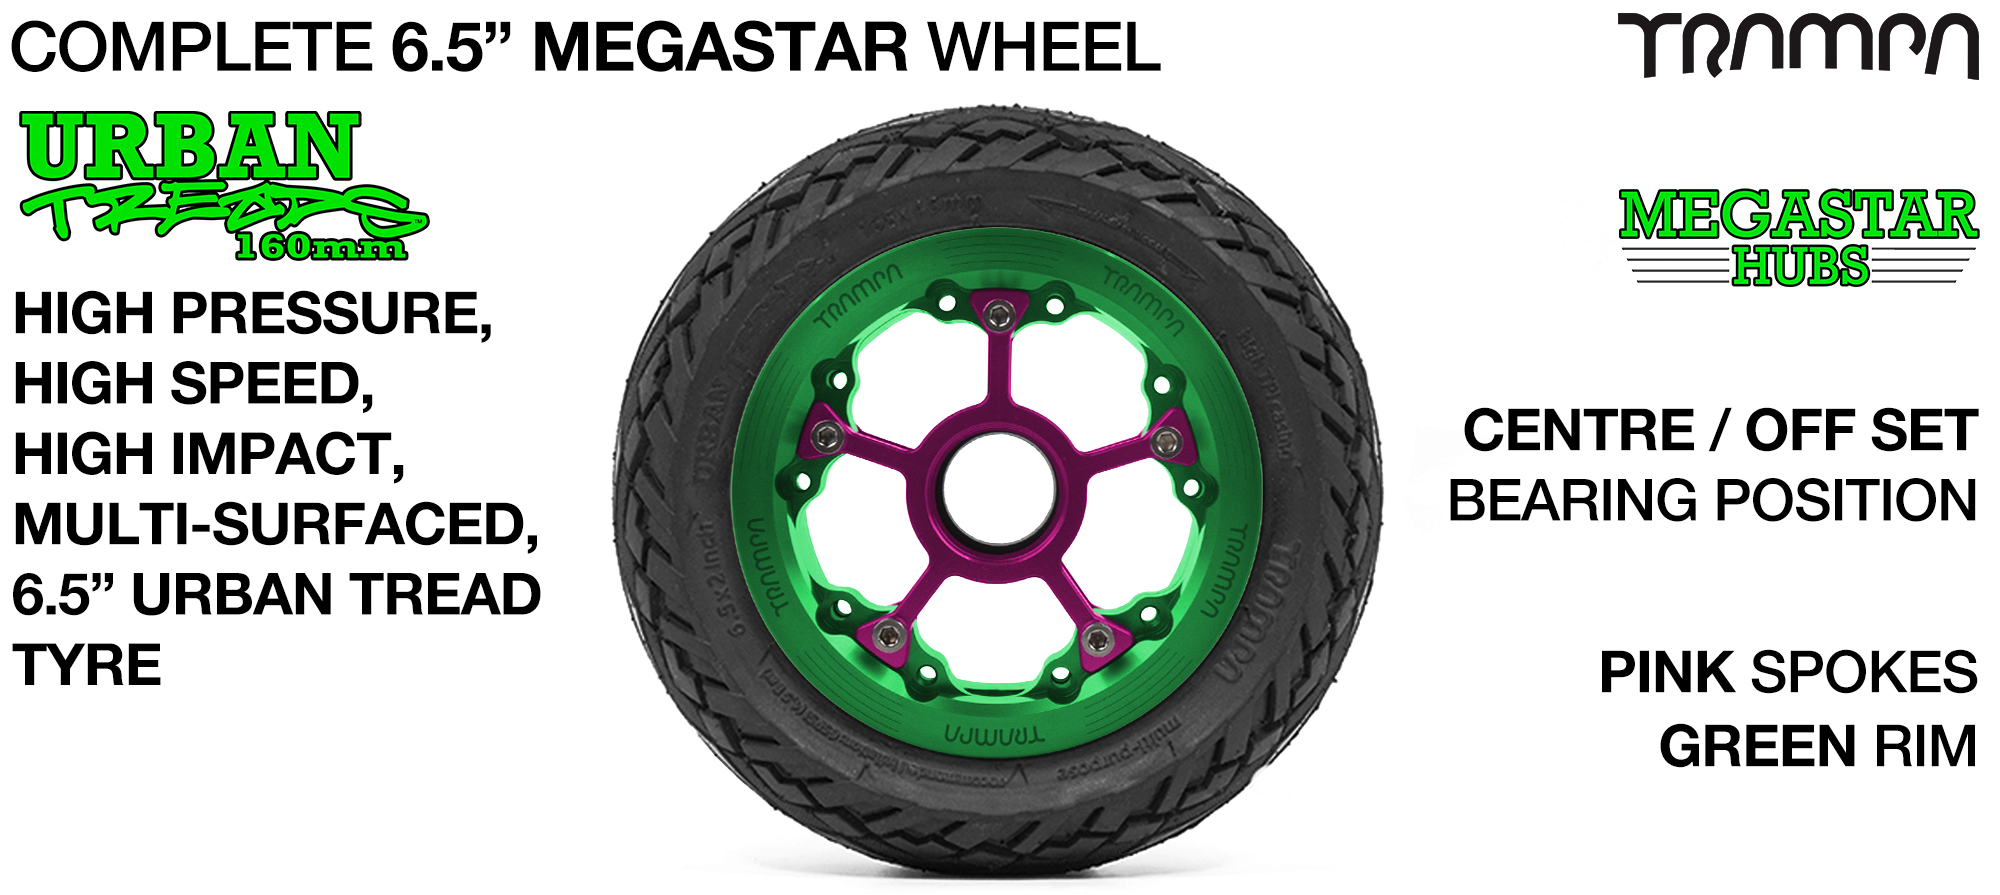 CENTER-SET MEGASTAR 8 Hub with GREEN Rims & PINK Spokes with the amazing Low Profile 6.5 Inch URBAN Treads Tyres